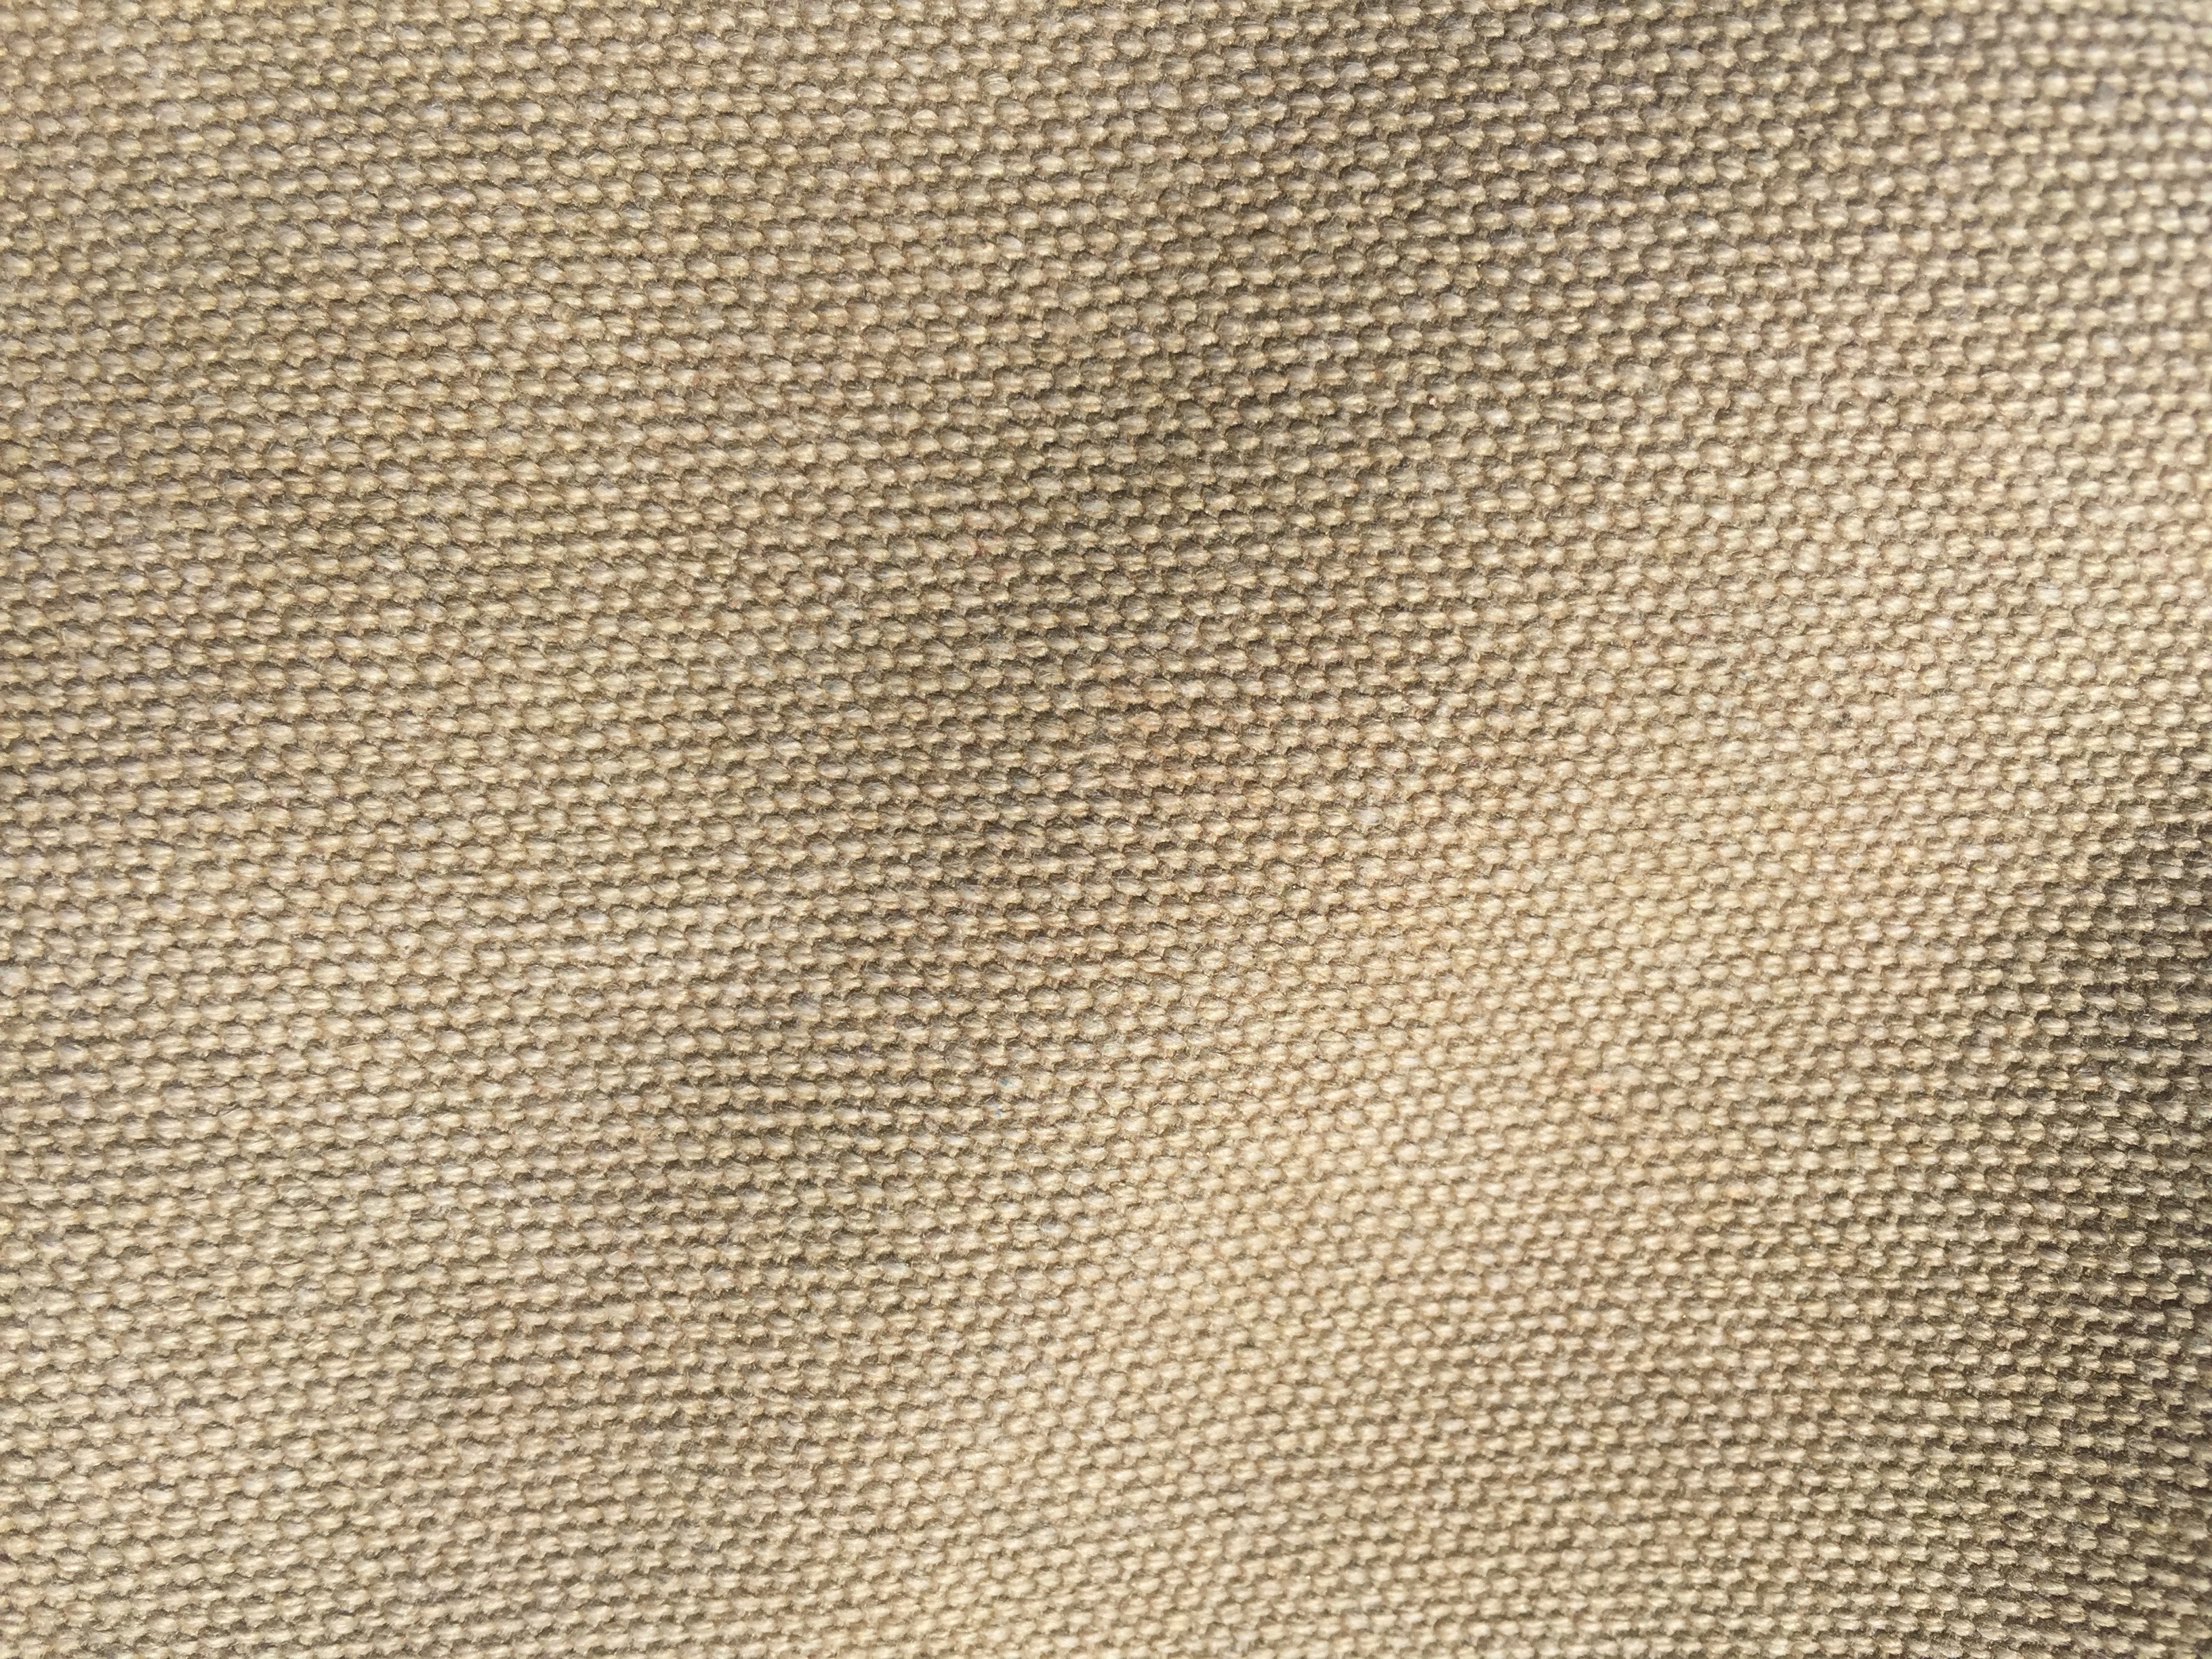 Canvas fabric close up details of stitching